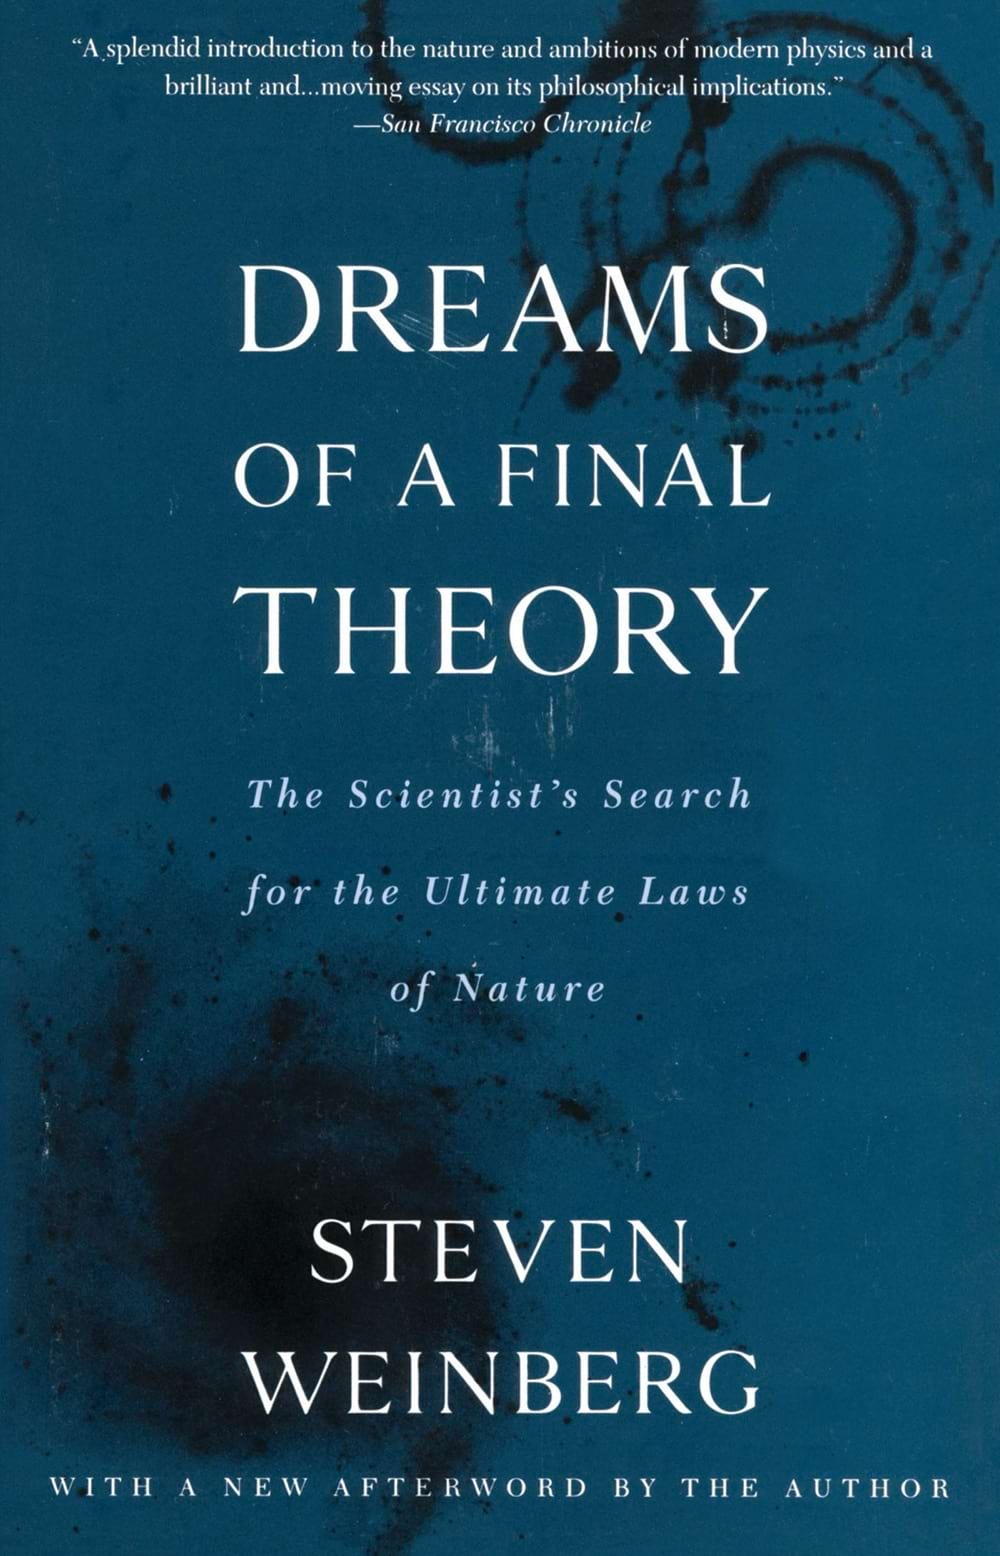 The cover of Dreams of a Final Theory